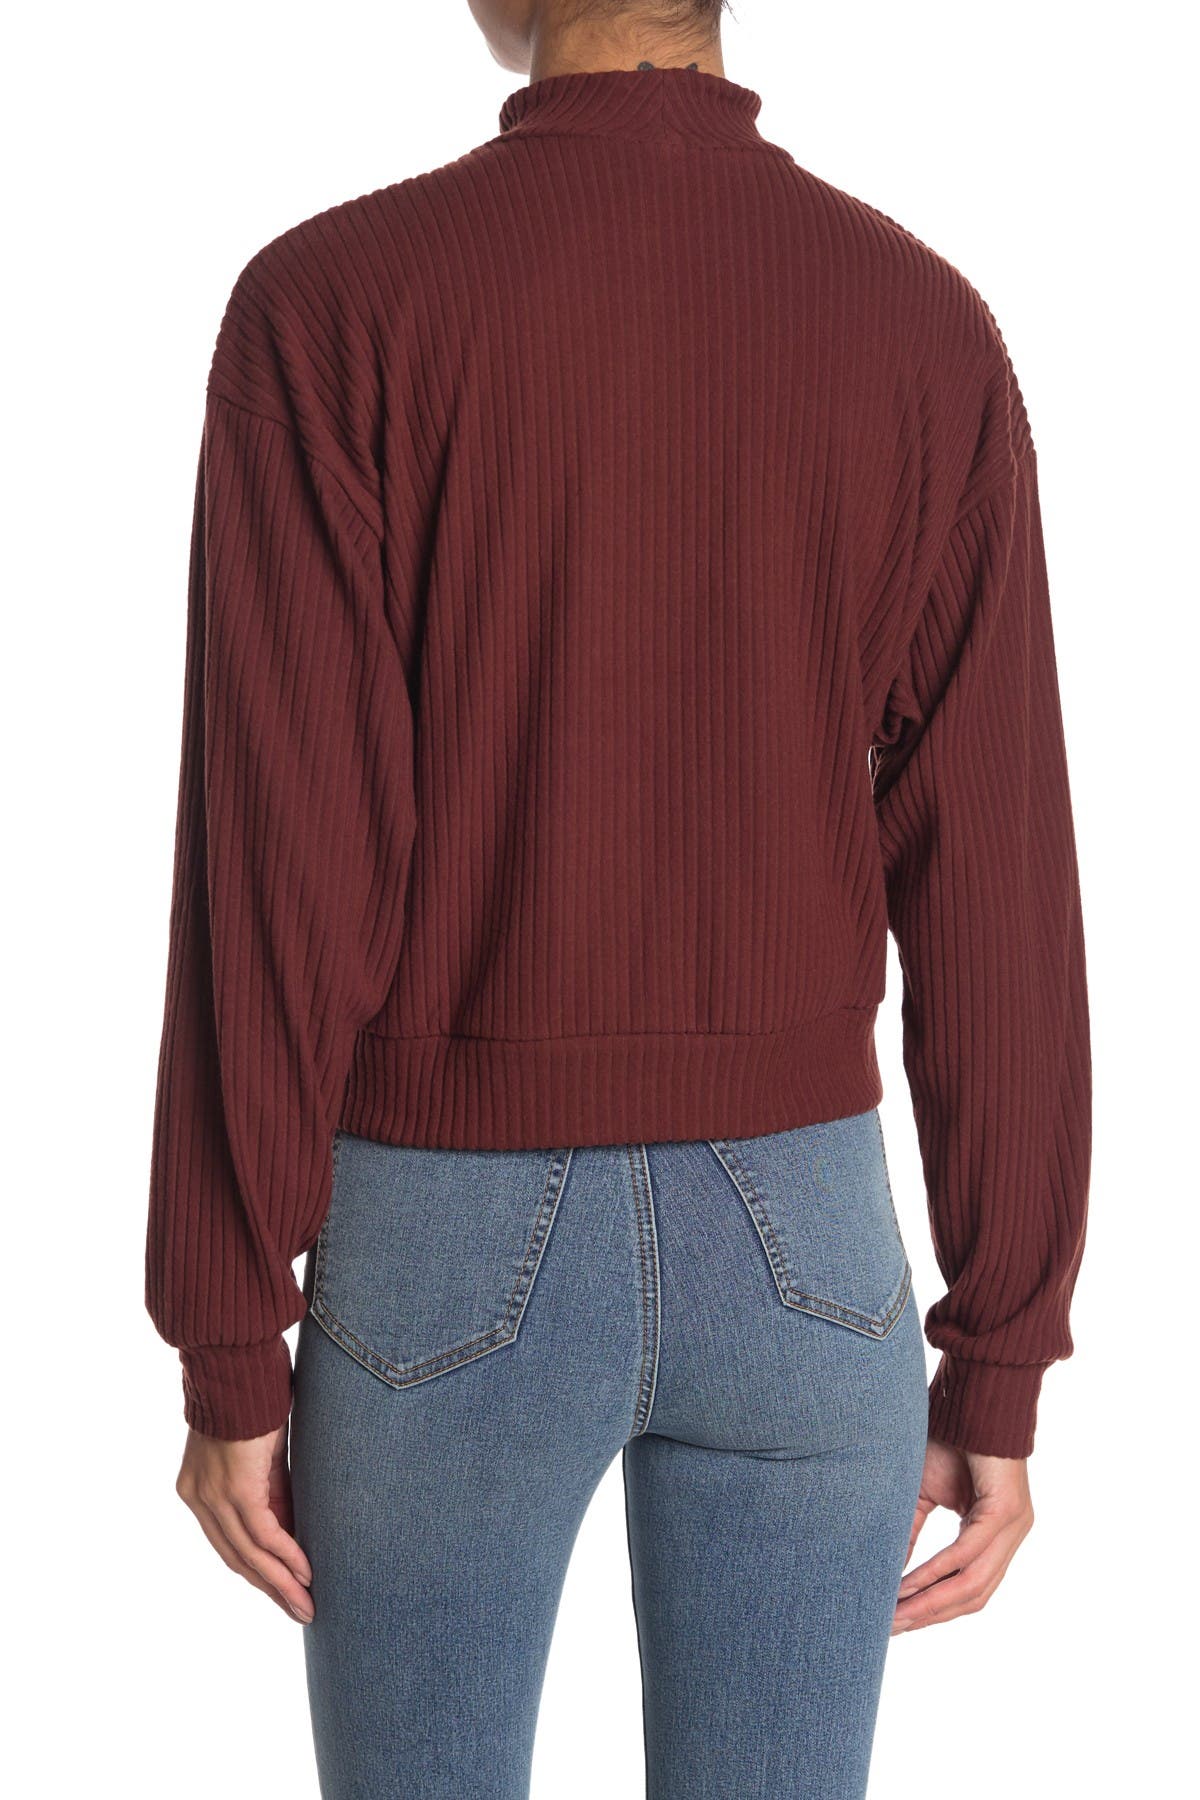 Abound Brushed Ribbed Knit Mock Neck Sweater In Dark Brown